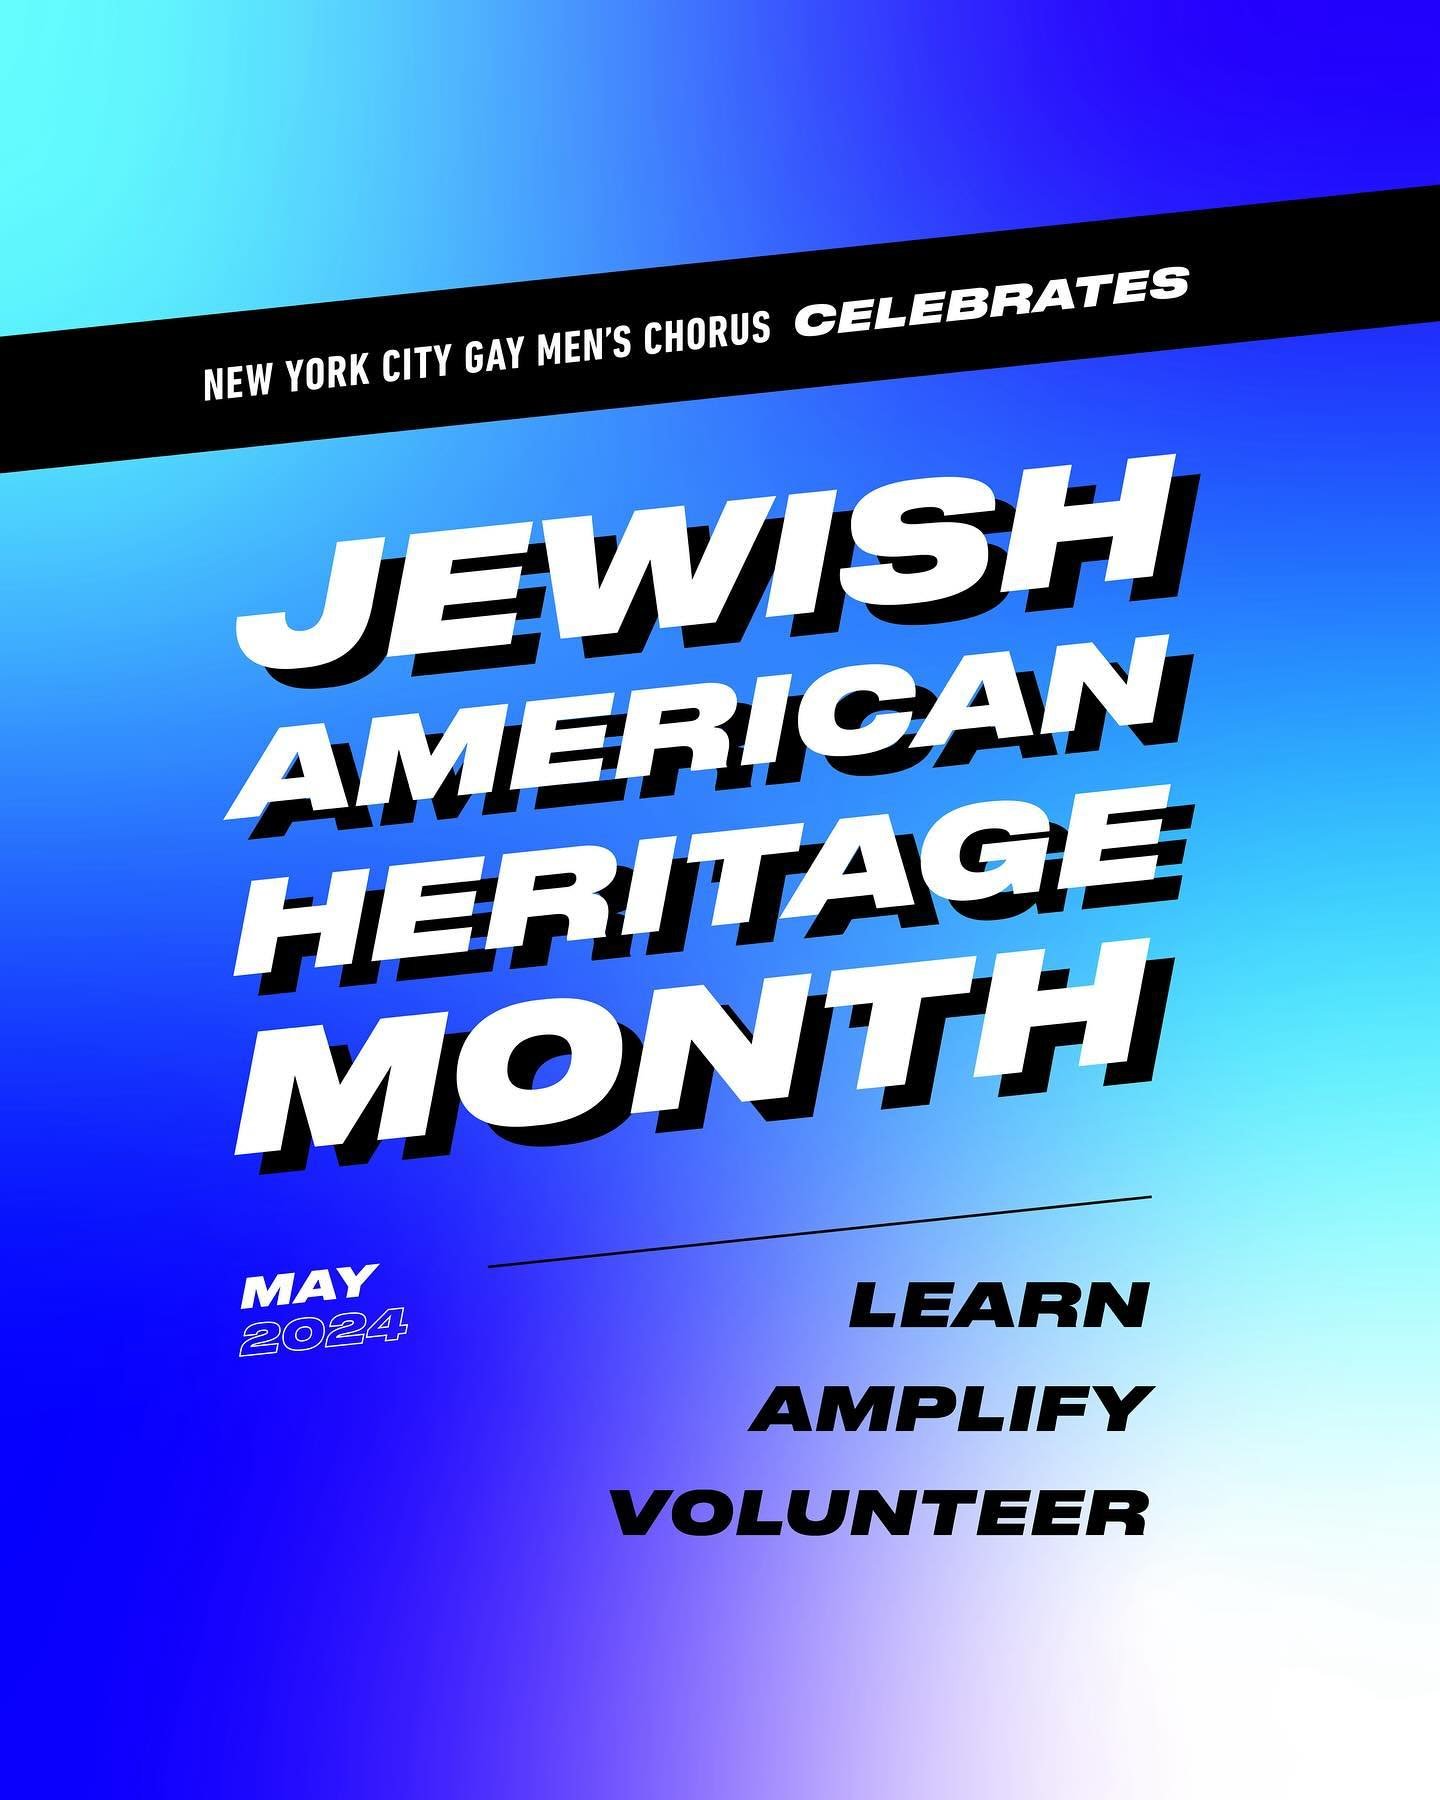 May marks Jewish American Heritage Month. We celebrate by continuing to learn, amplify, and volunteer among our queer community in New York City and beyond.

🗣️Check out the accounts tagged to learn more about the work they do in NYC, serving our co